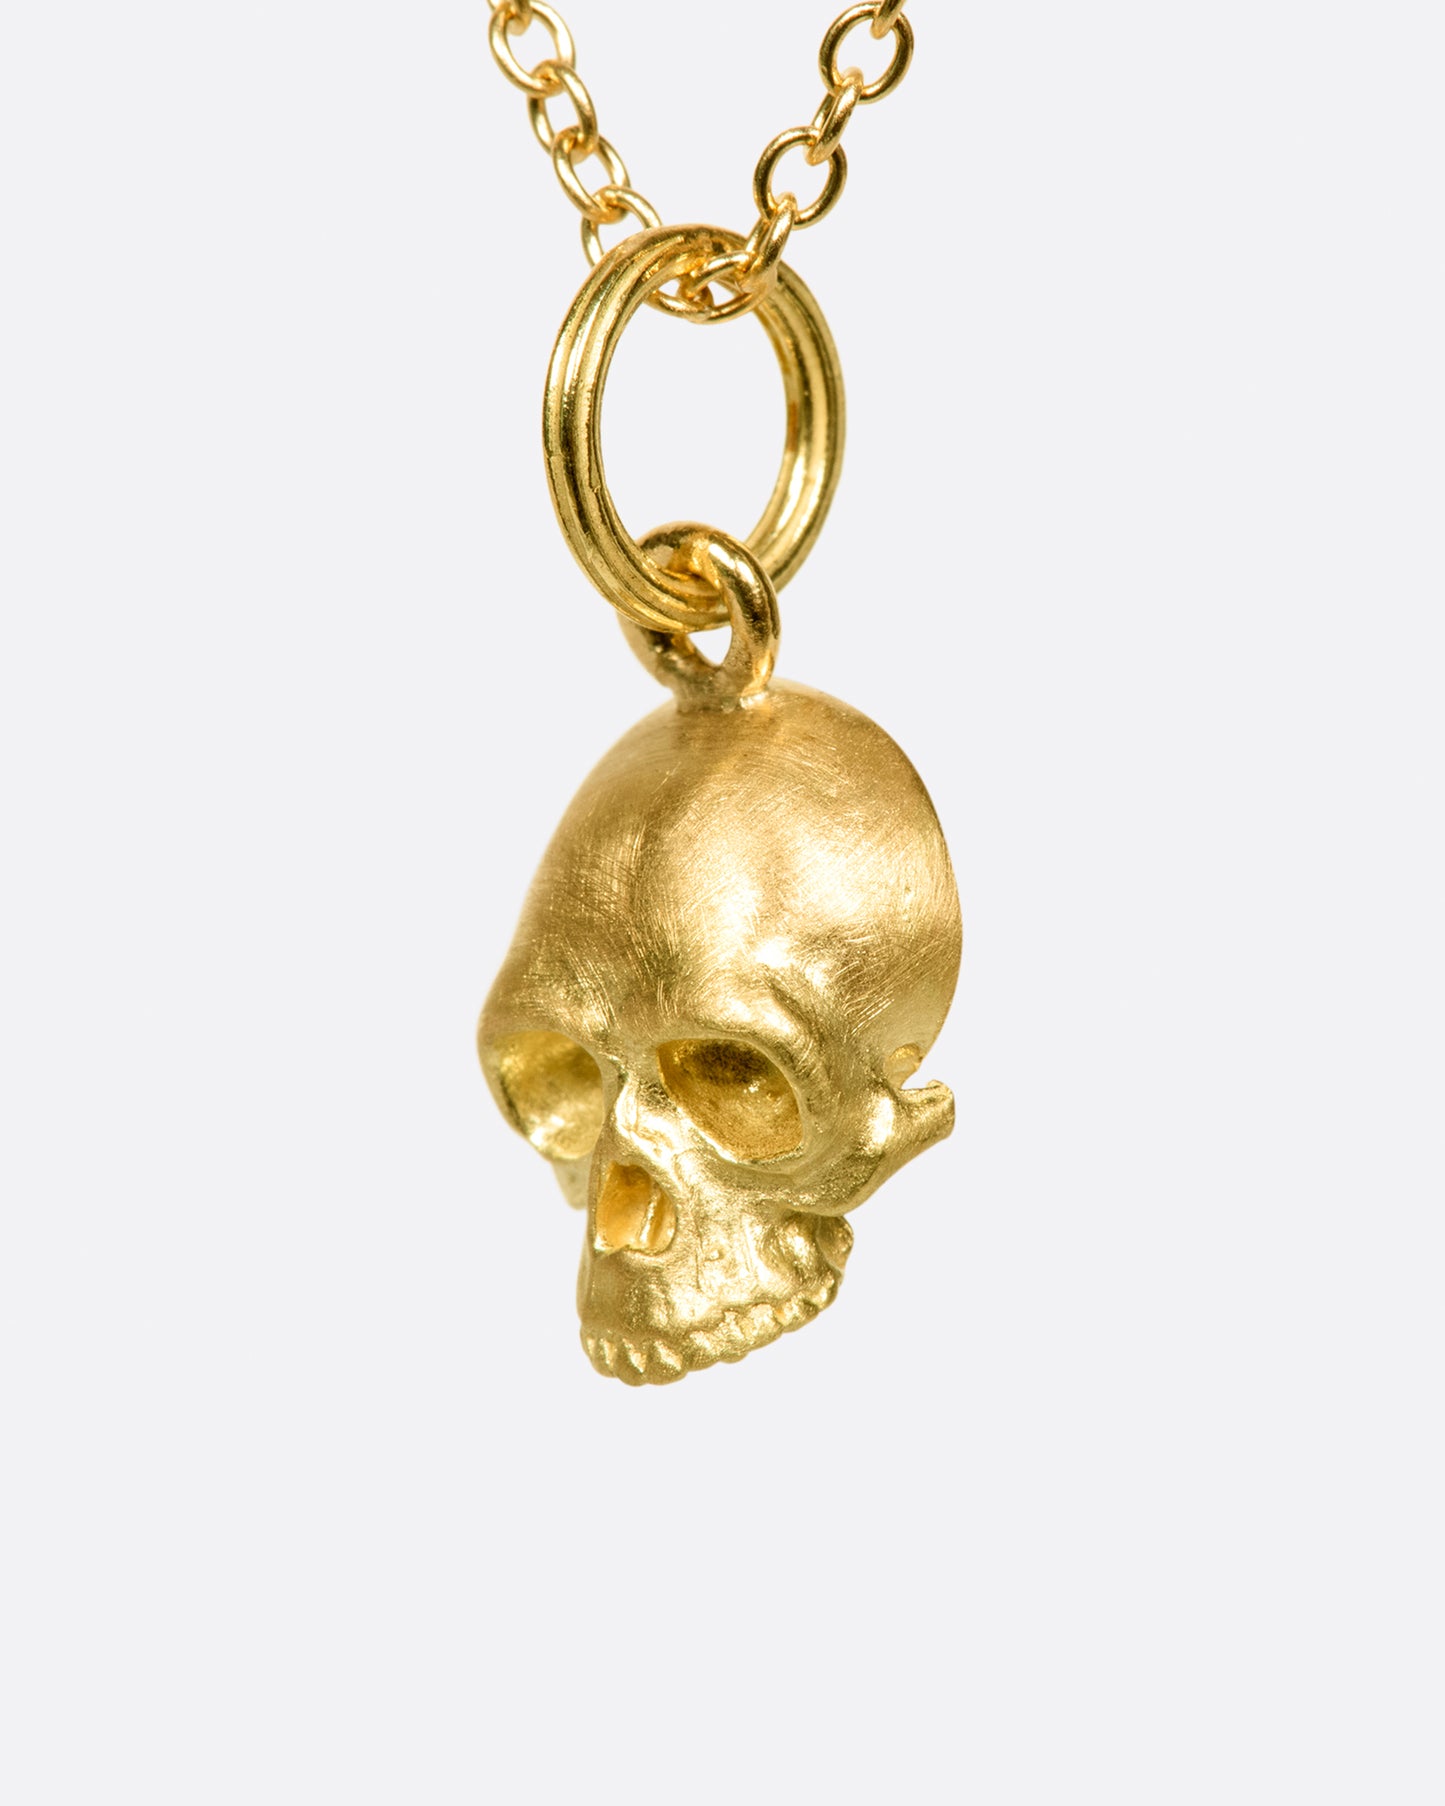 A cable chain necklace with a skull pendant based on the anatomical illustrations of Leonardo Da Vinci.